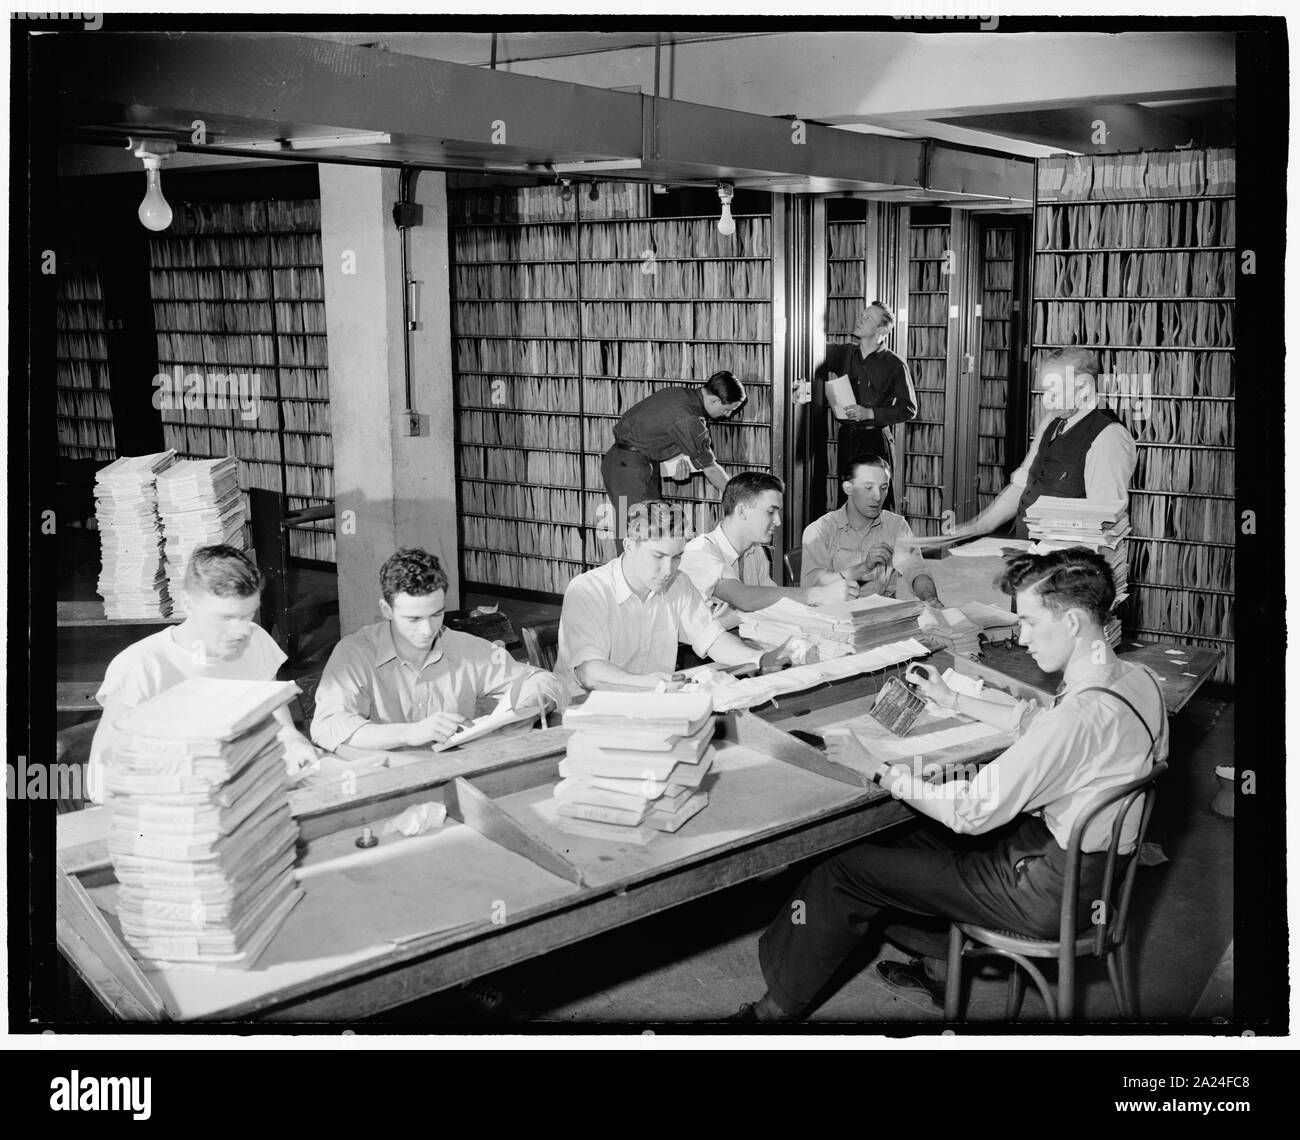 Patent Office files. Washington, D.C., Feb. 29. Employees in the patent office file room. Approximately 2,180,00 patents are kept on file for public use, 2-29-40 Stock Photo